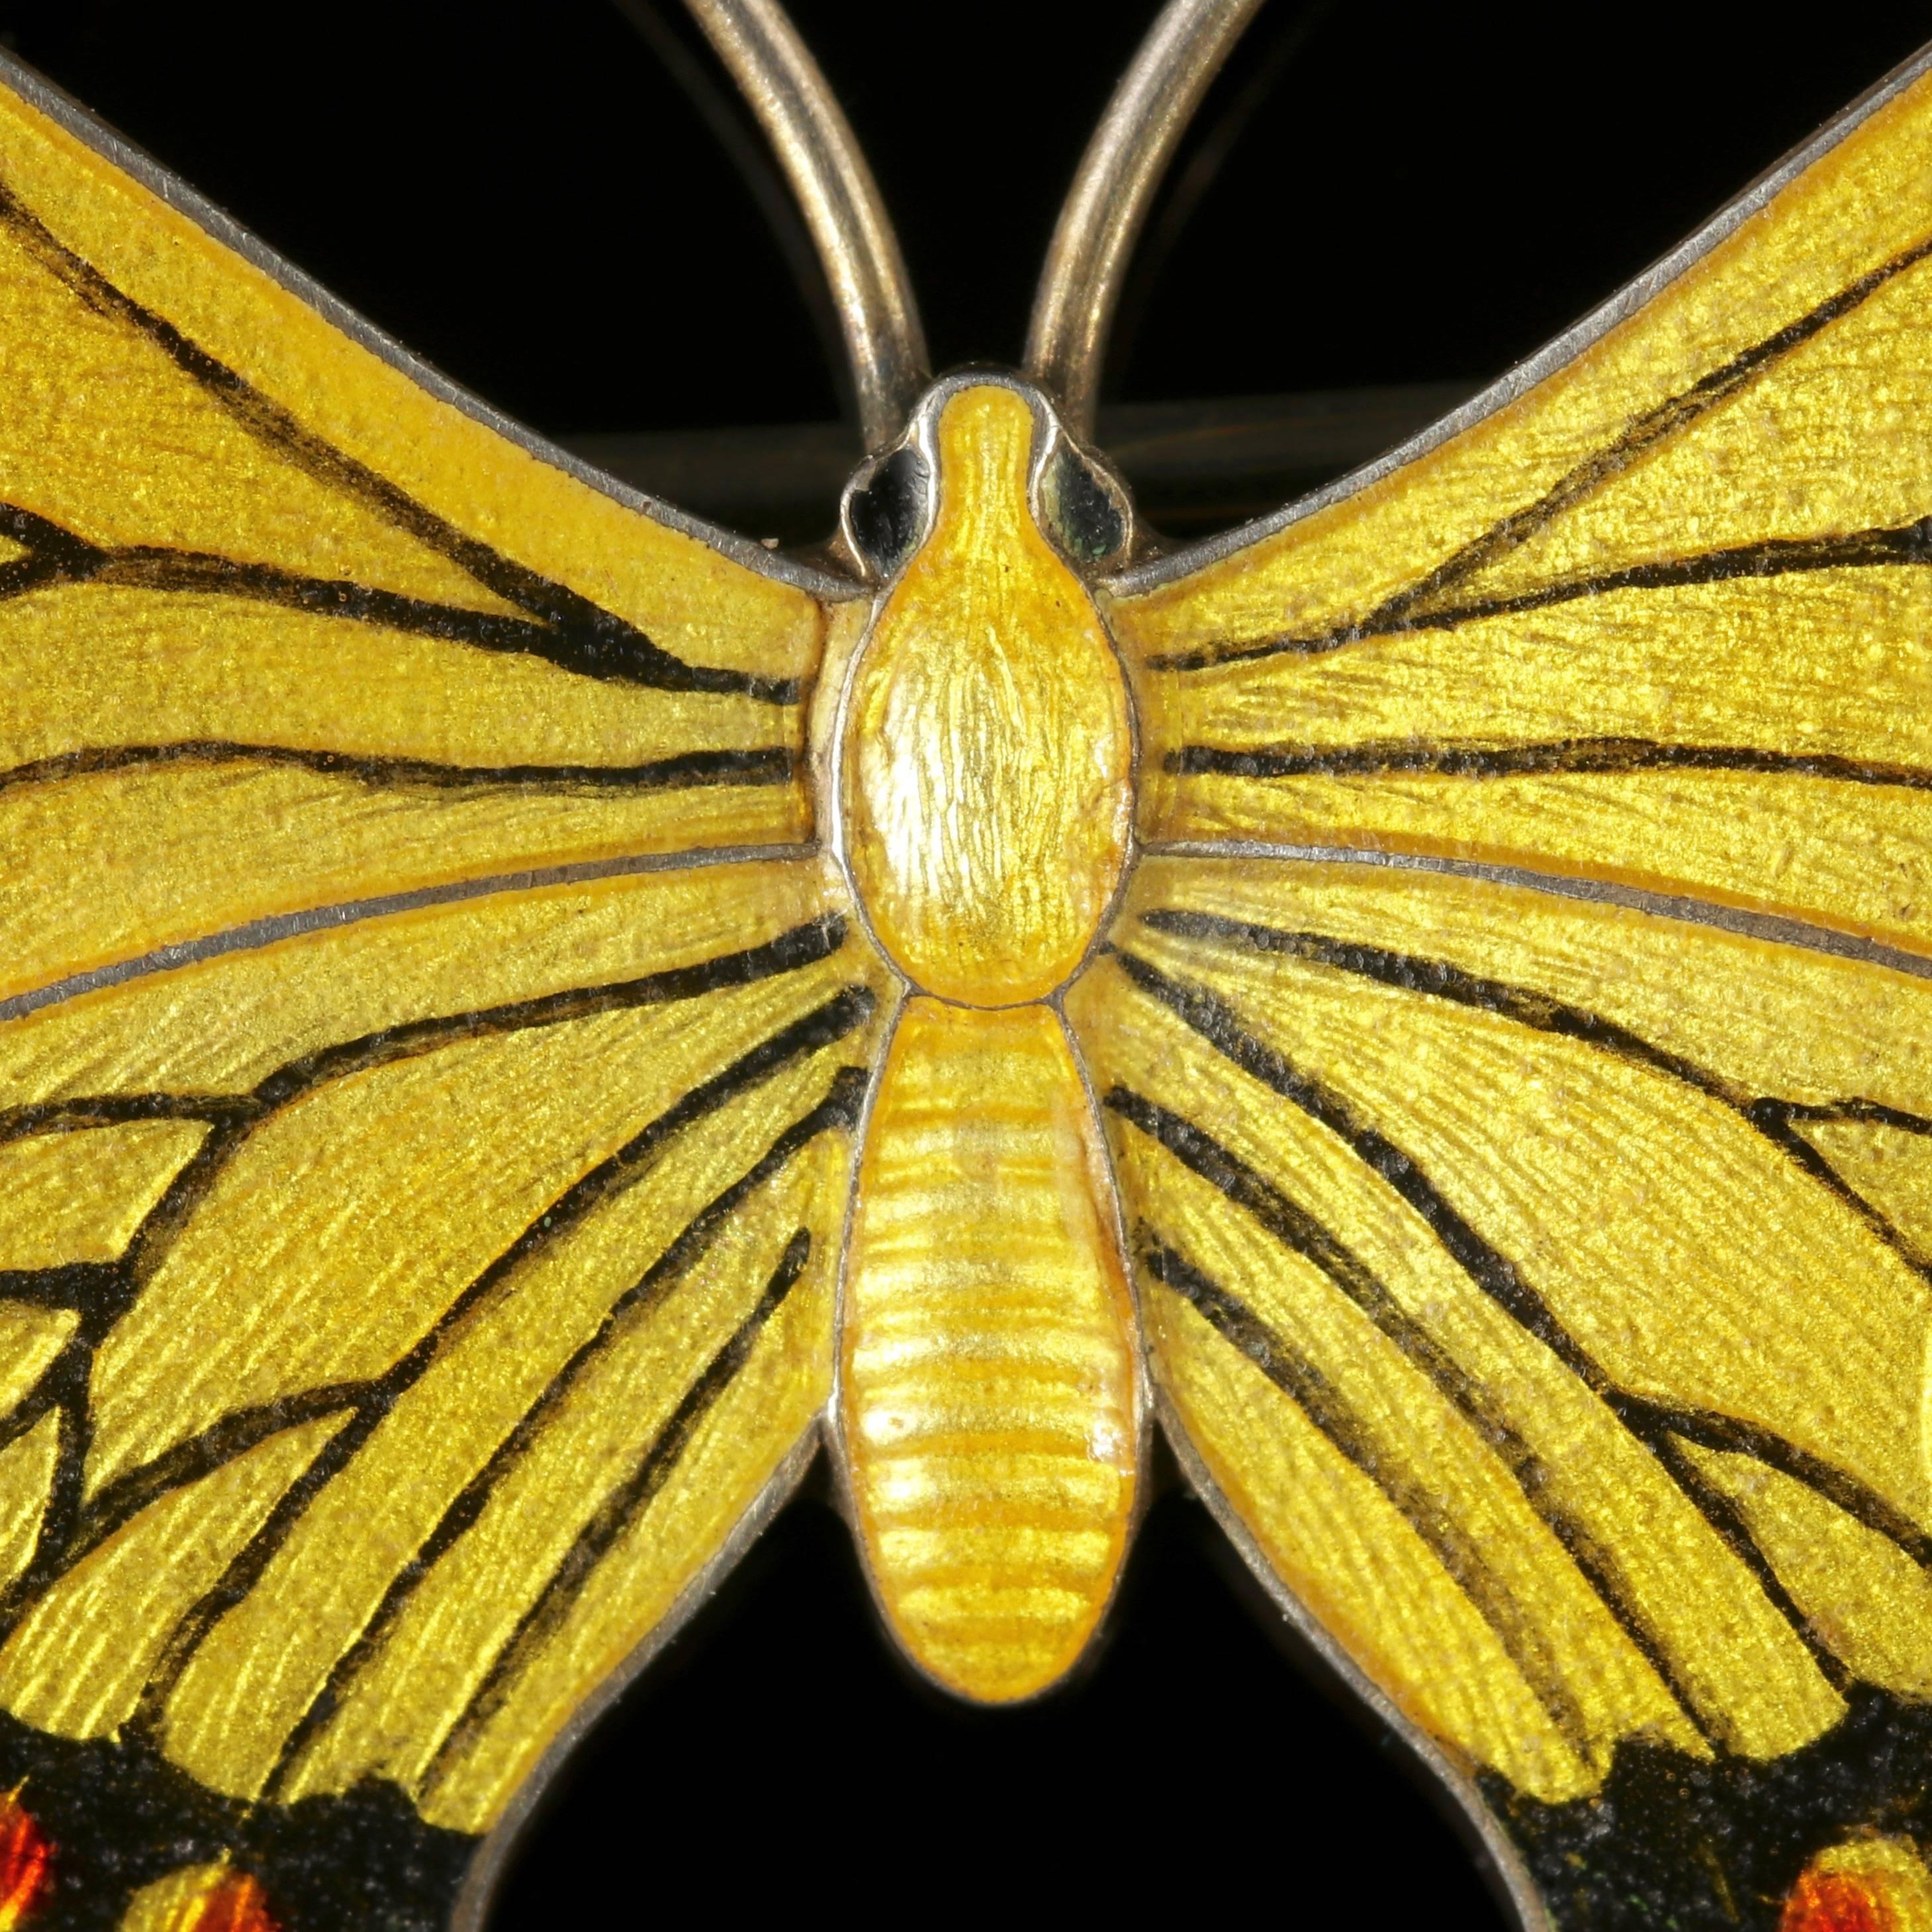 To read more please click continue reading below-

This fabulous Sterling Silver butterfly brooch is fully hallmarked Birmingham 1916.

The beautiful butterfly displays striking yellow Enamel detail with black, gold borders and red spots on the